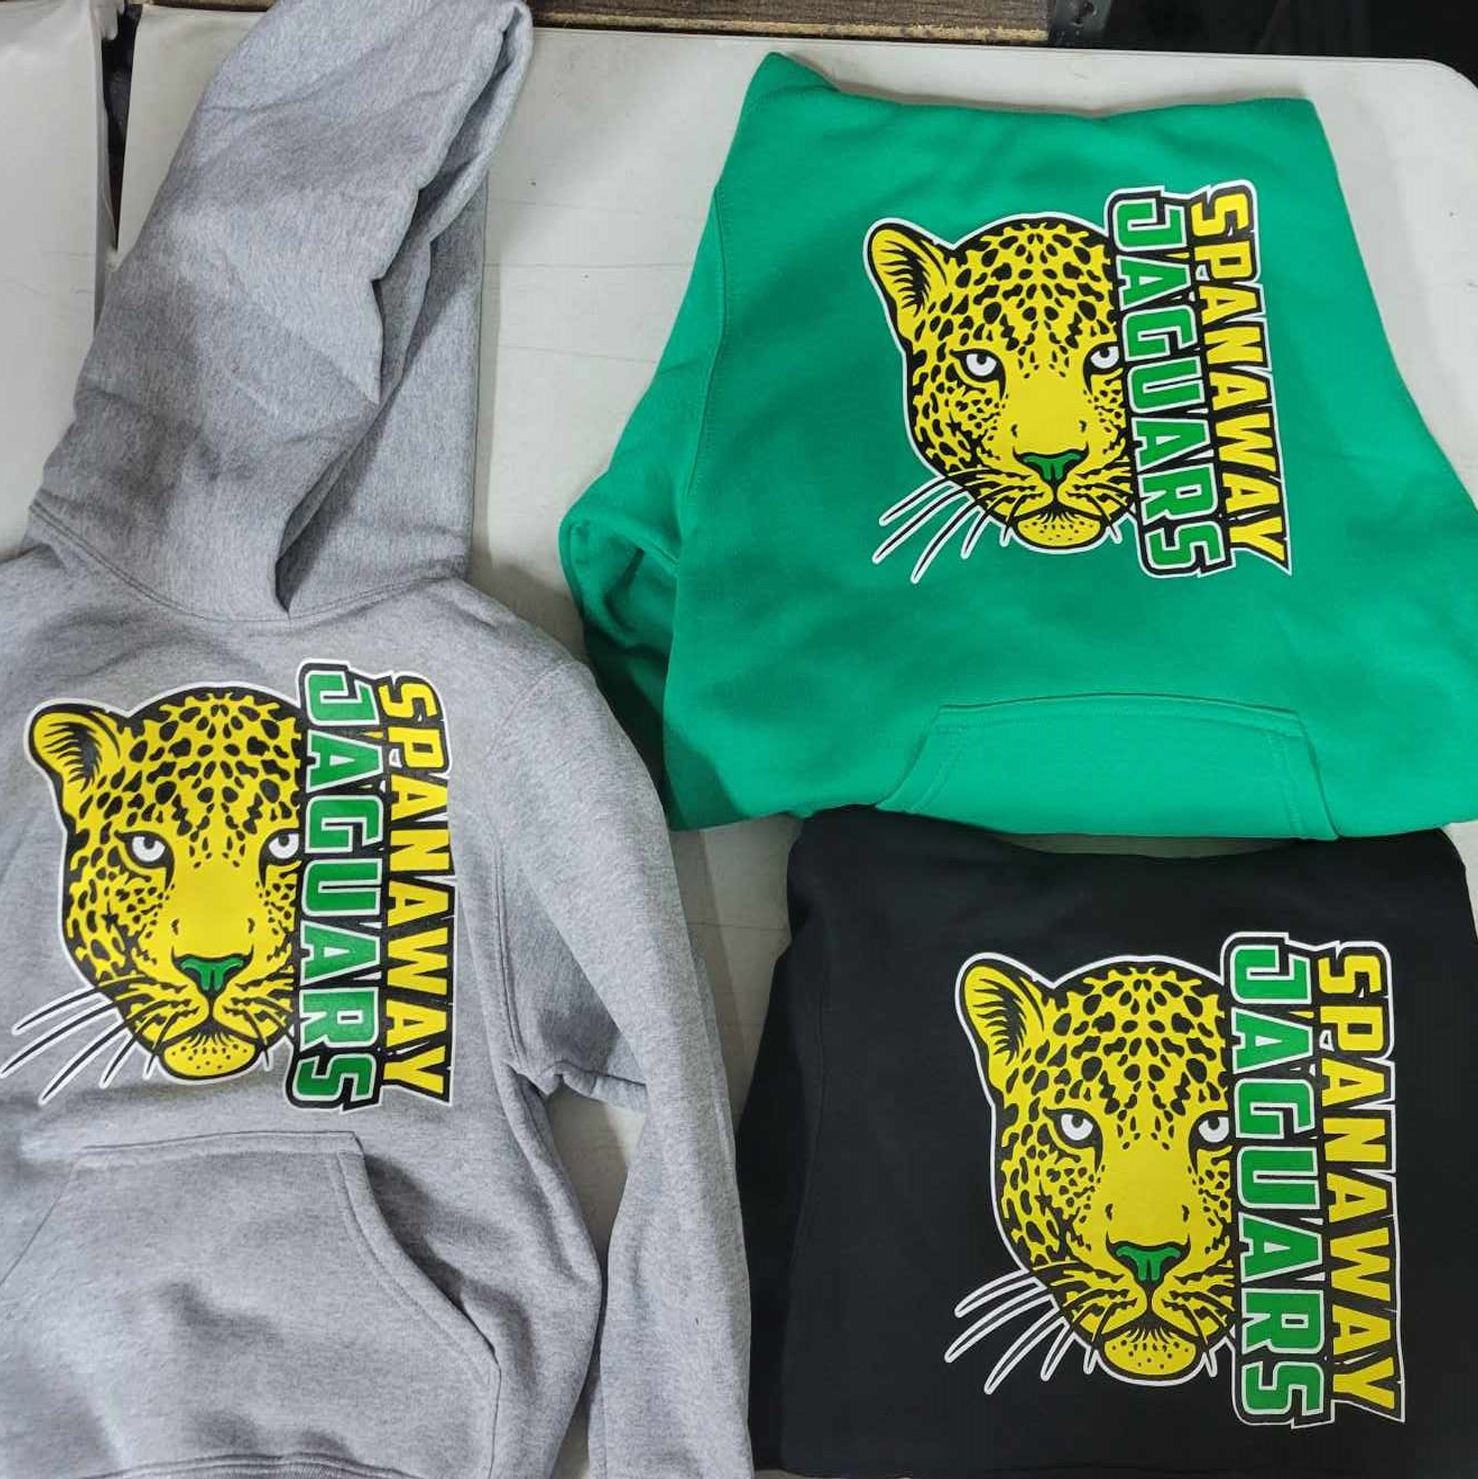 Three hoodies with the Spanaway Elementary Jaguars logo on them. One hoodie is gray, another is kelly green, and the final one is black.